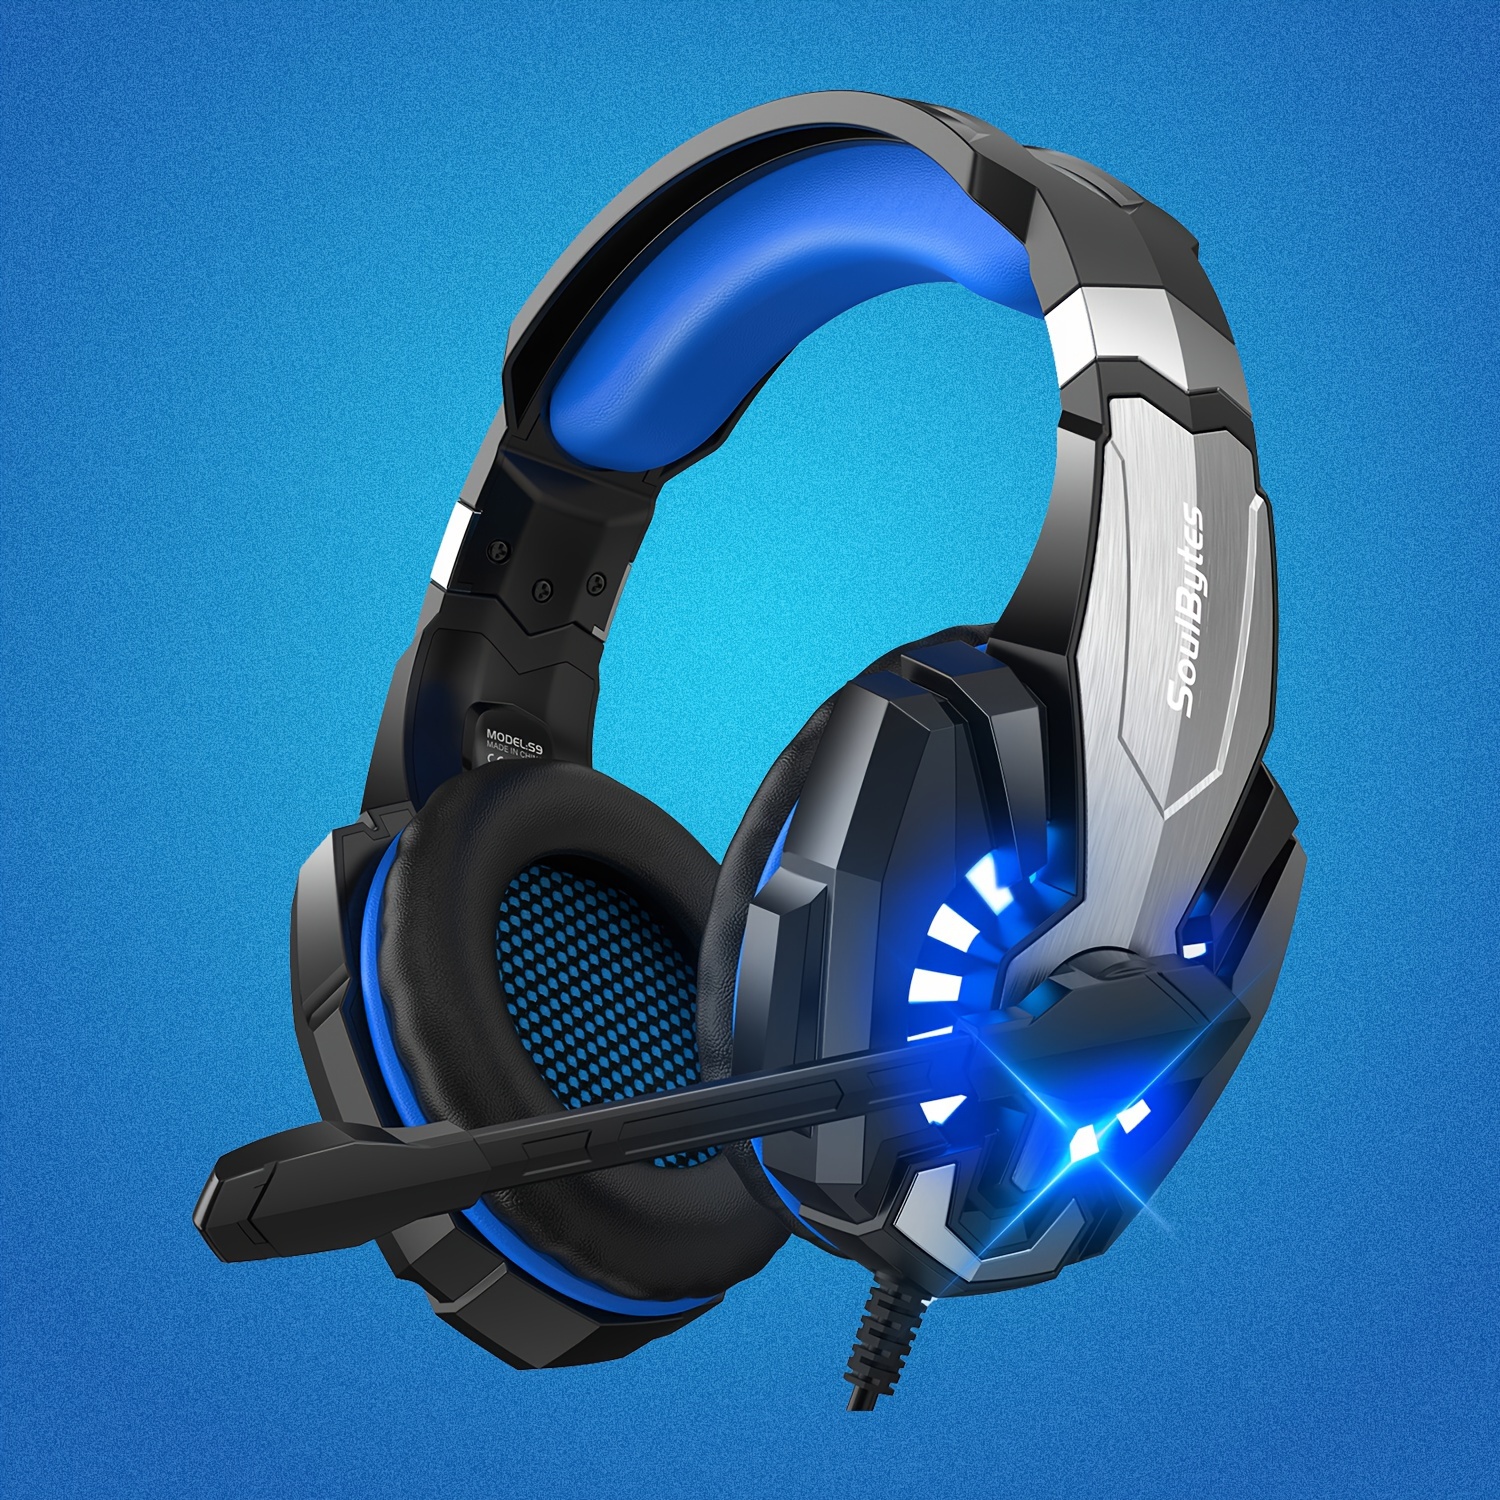 experience immersive audio with soulbytes s9 stereo gaming headset for ps4 pc xbox one and ps5